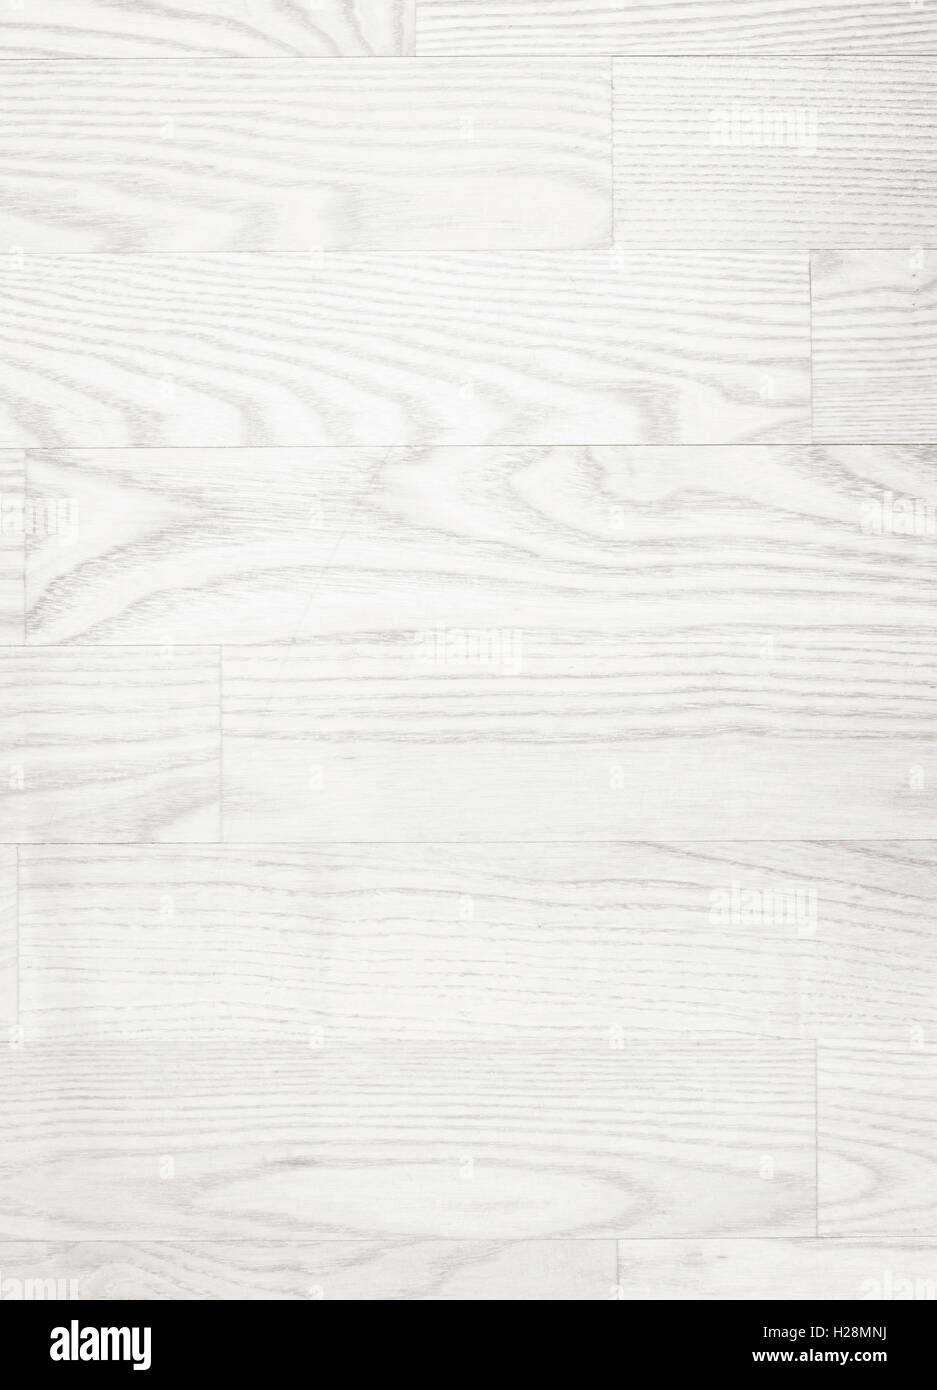 White wooden planks, tabletop, parquet floor surface. Stock Photo